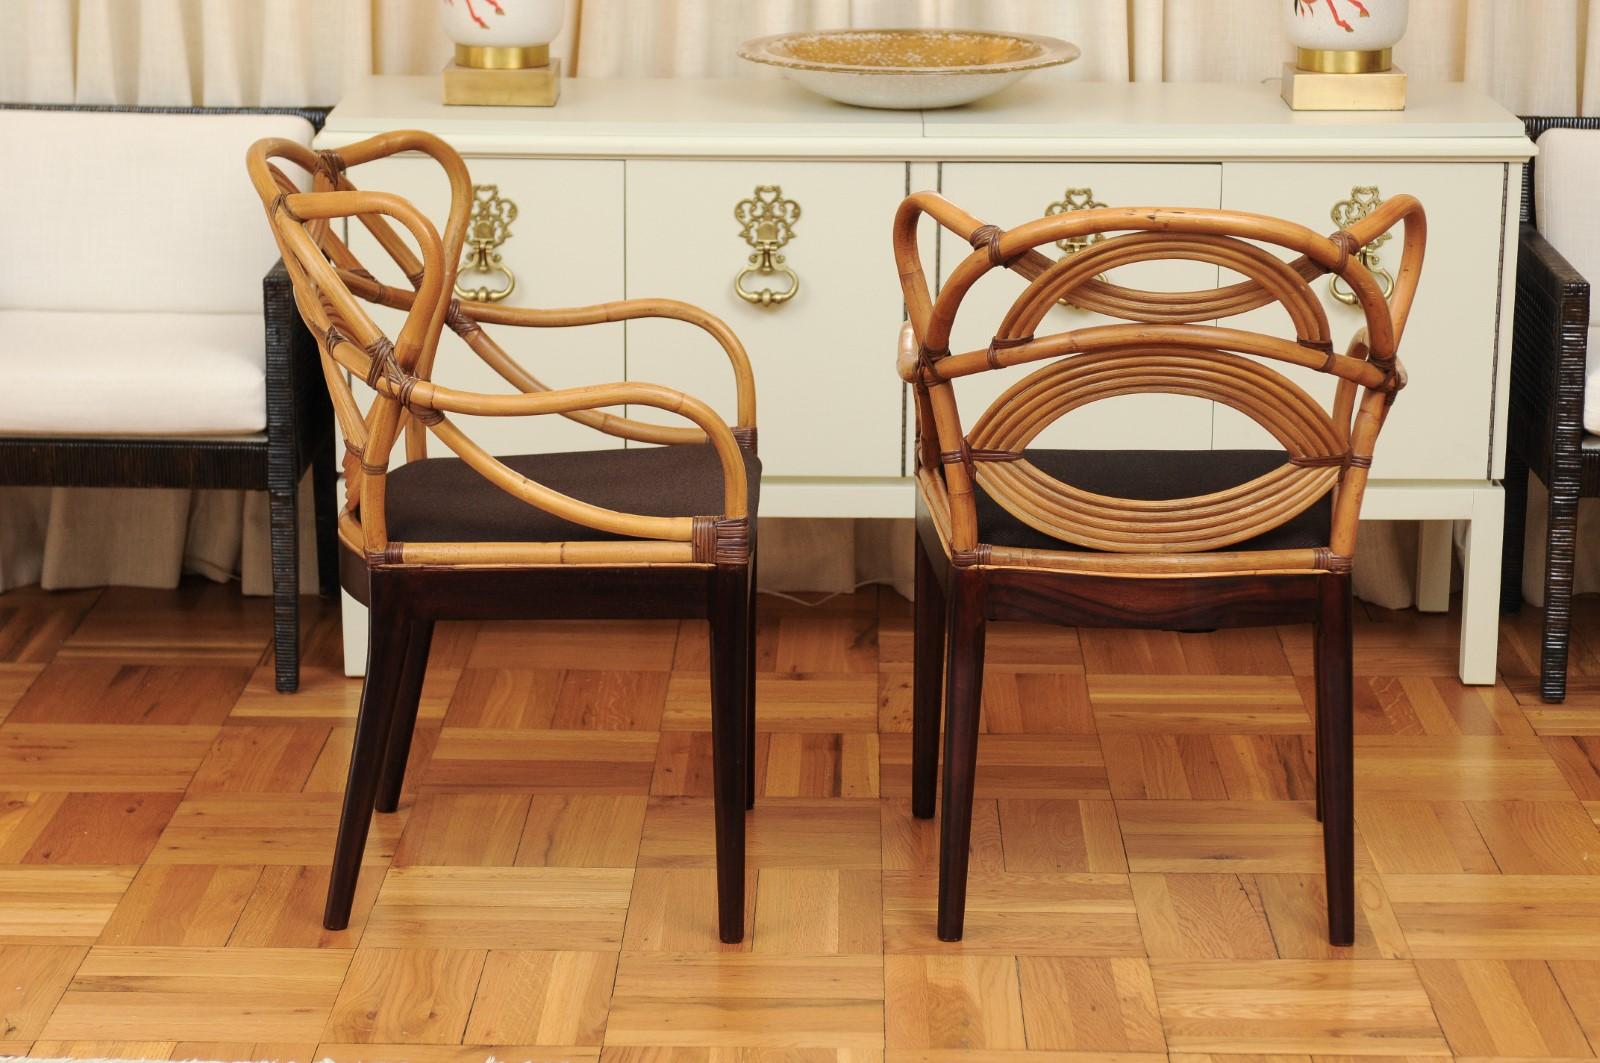 Staggering Set of 8 Sculptural Scalloped Back Rattan Dining Chairs, circa 1995 2